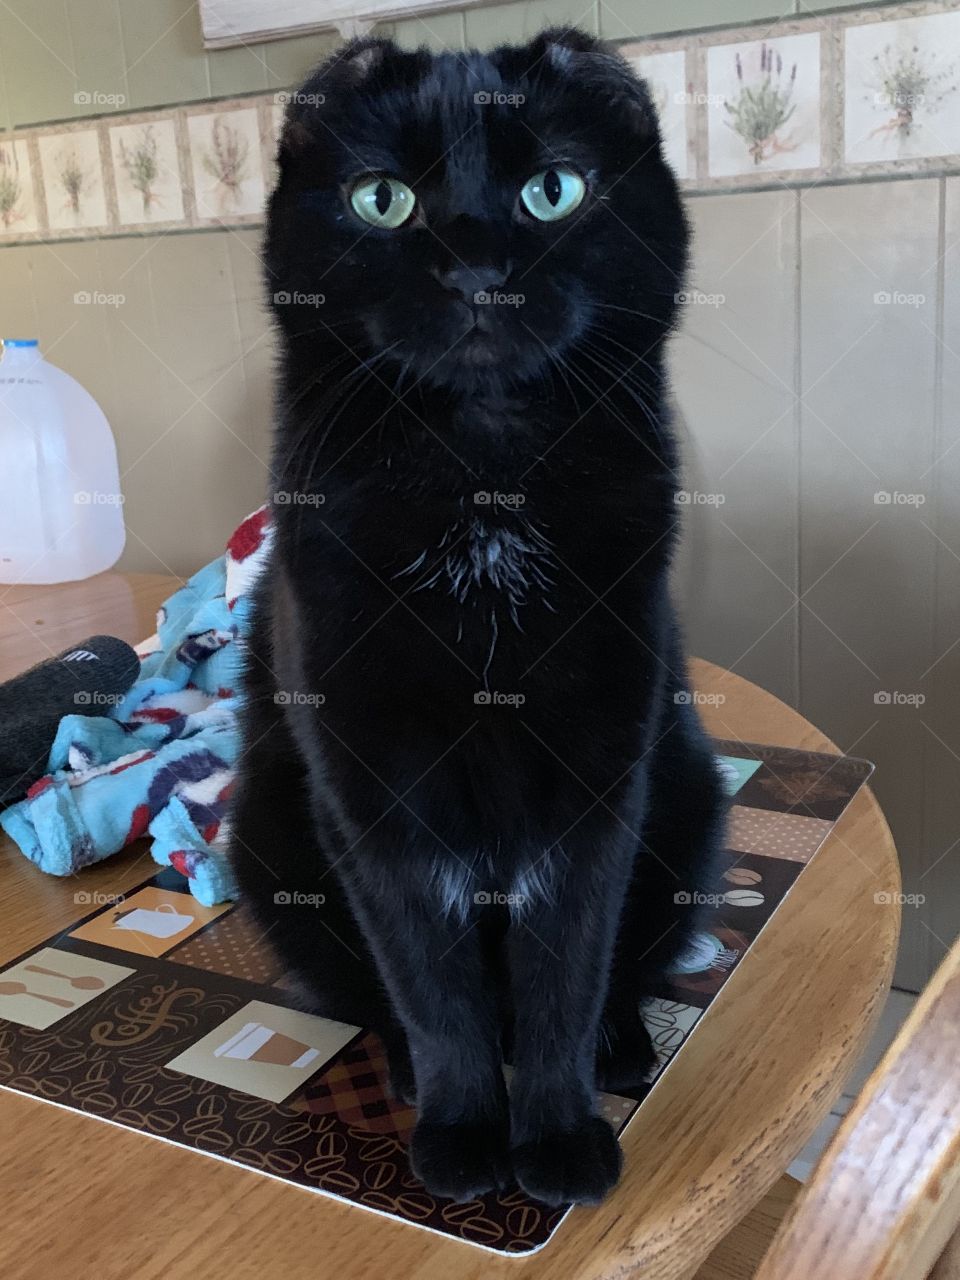 Black cat. Beautiful No ears-frostbite. Rescued